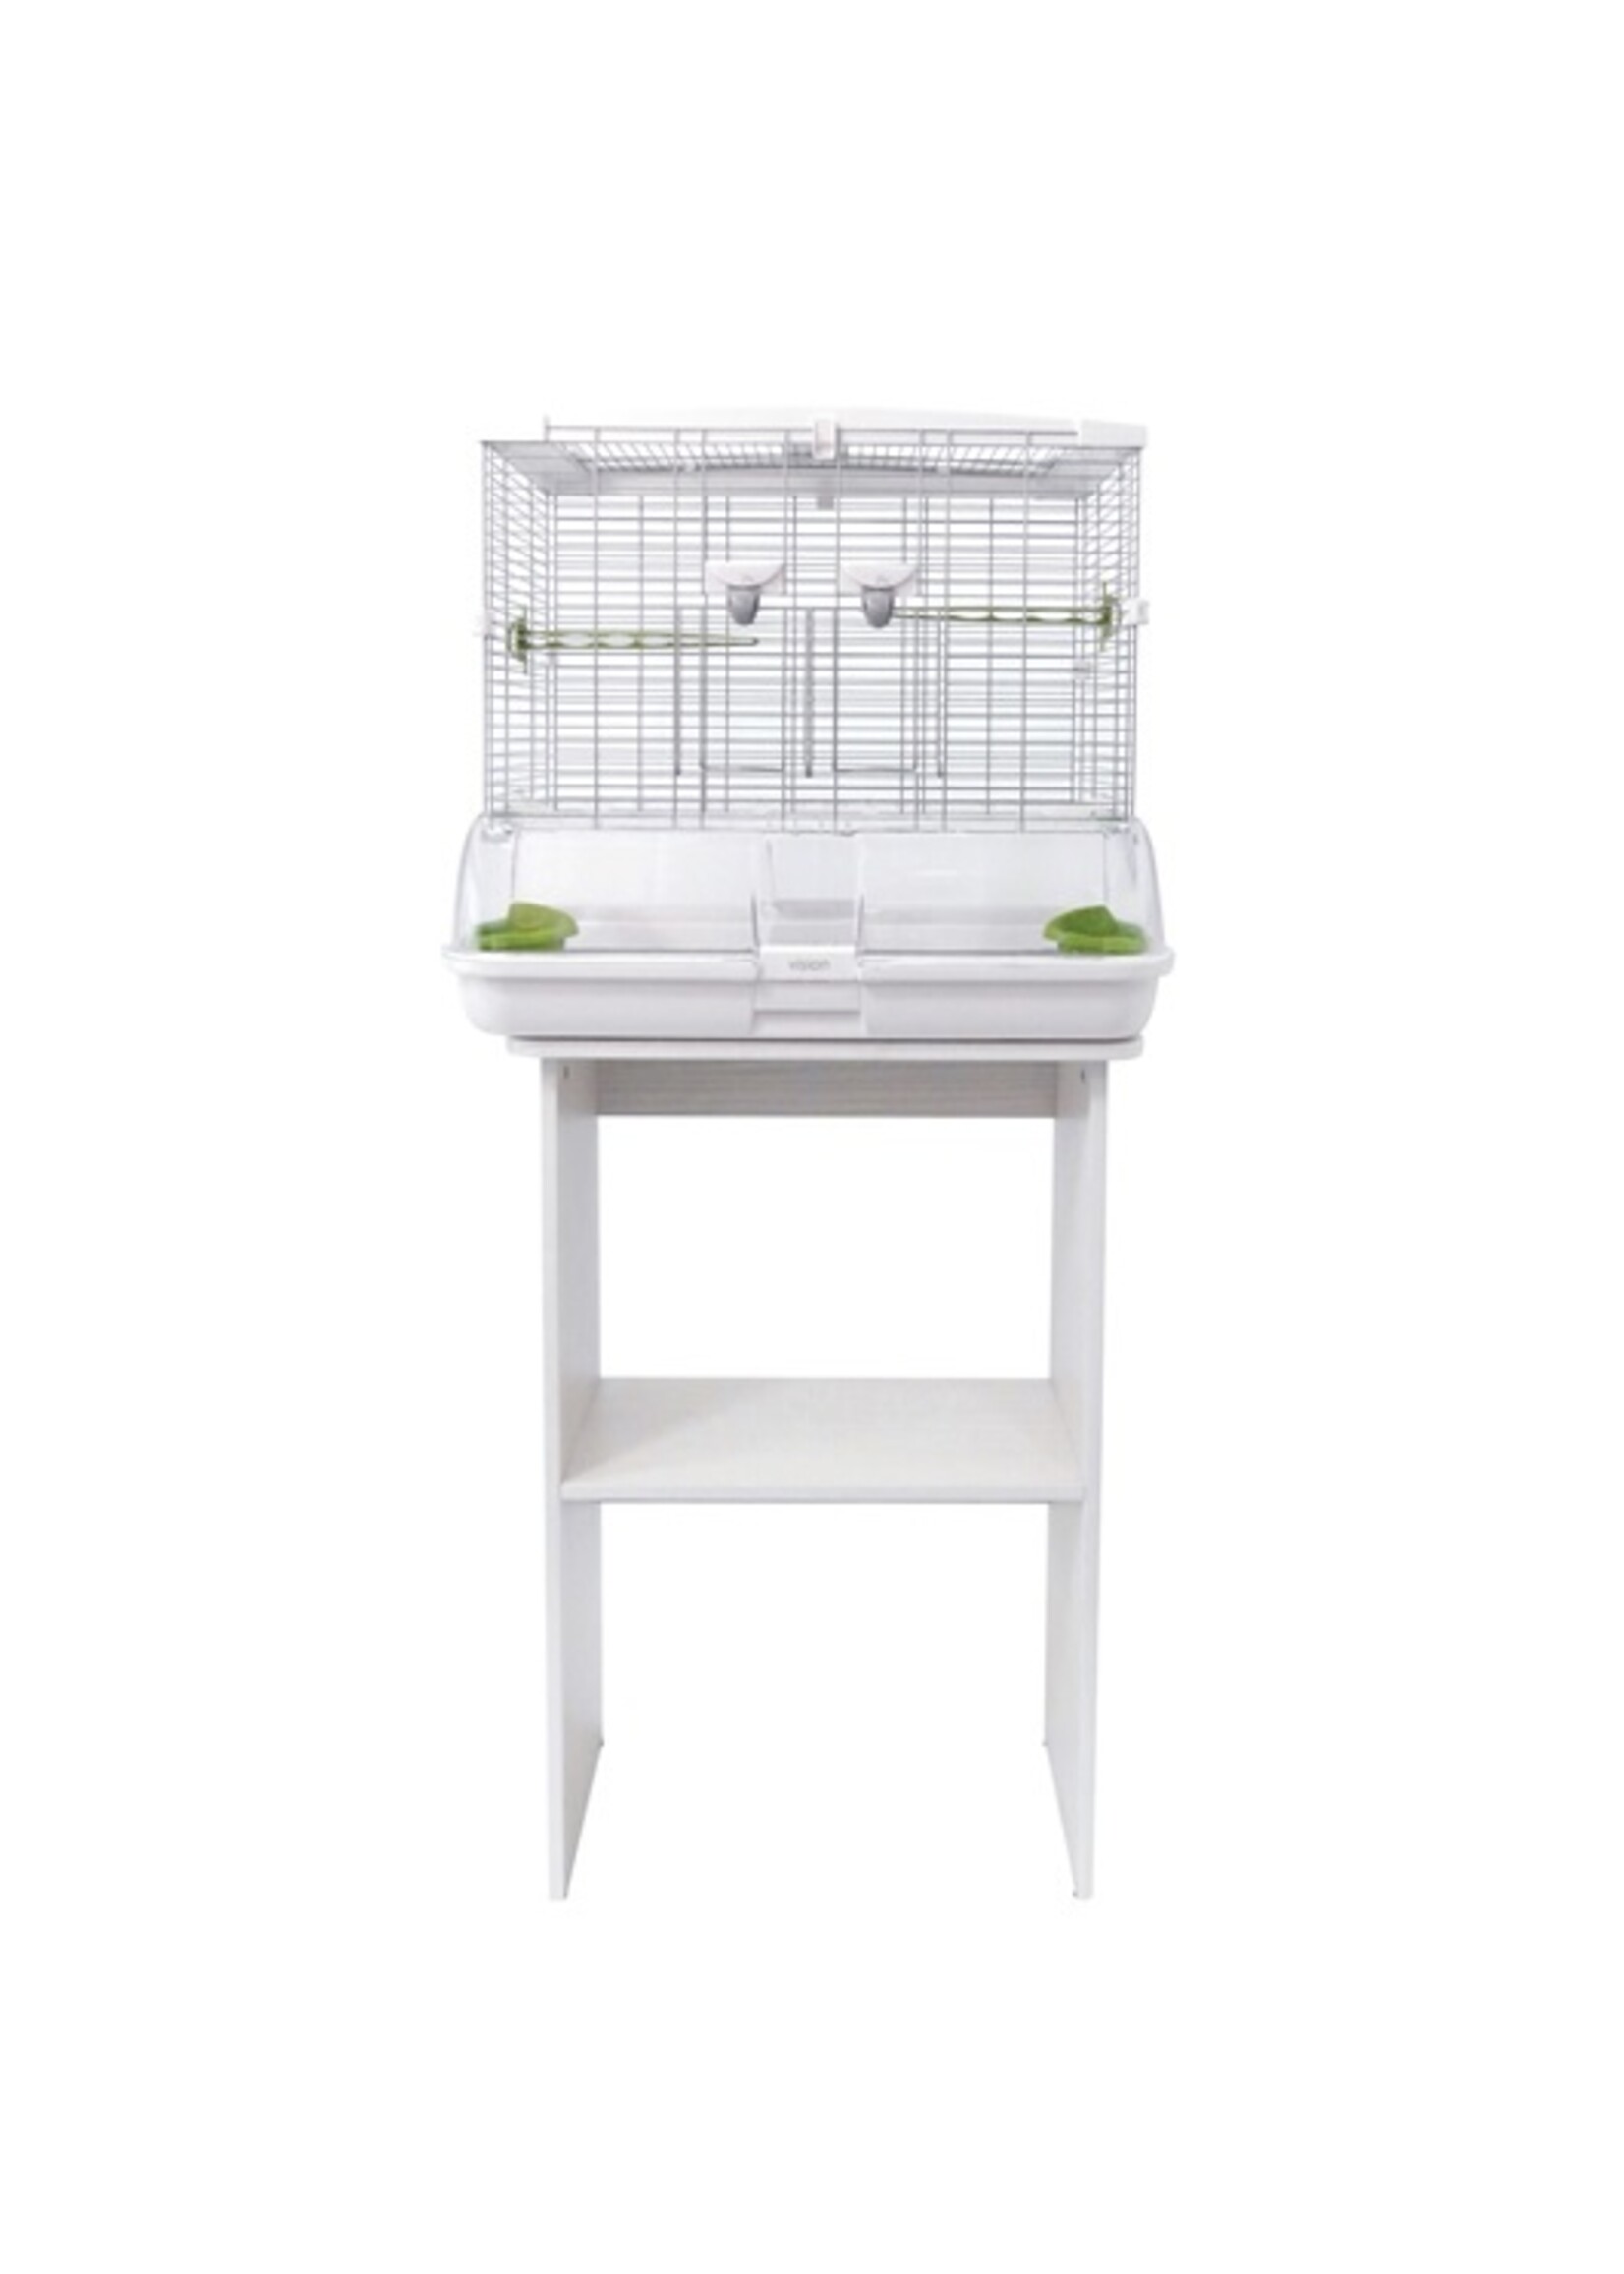 Vision Vision Bird Cage Stand White